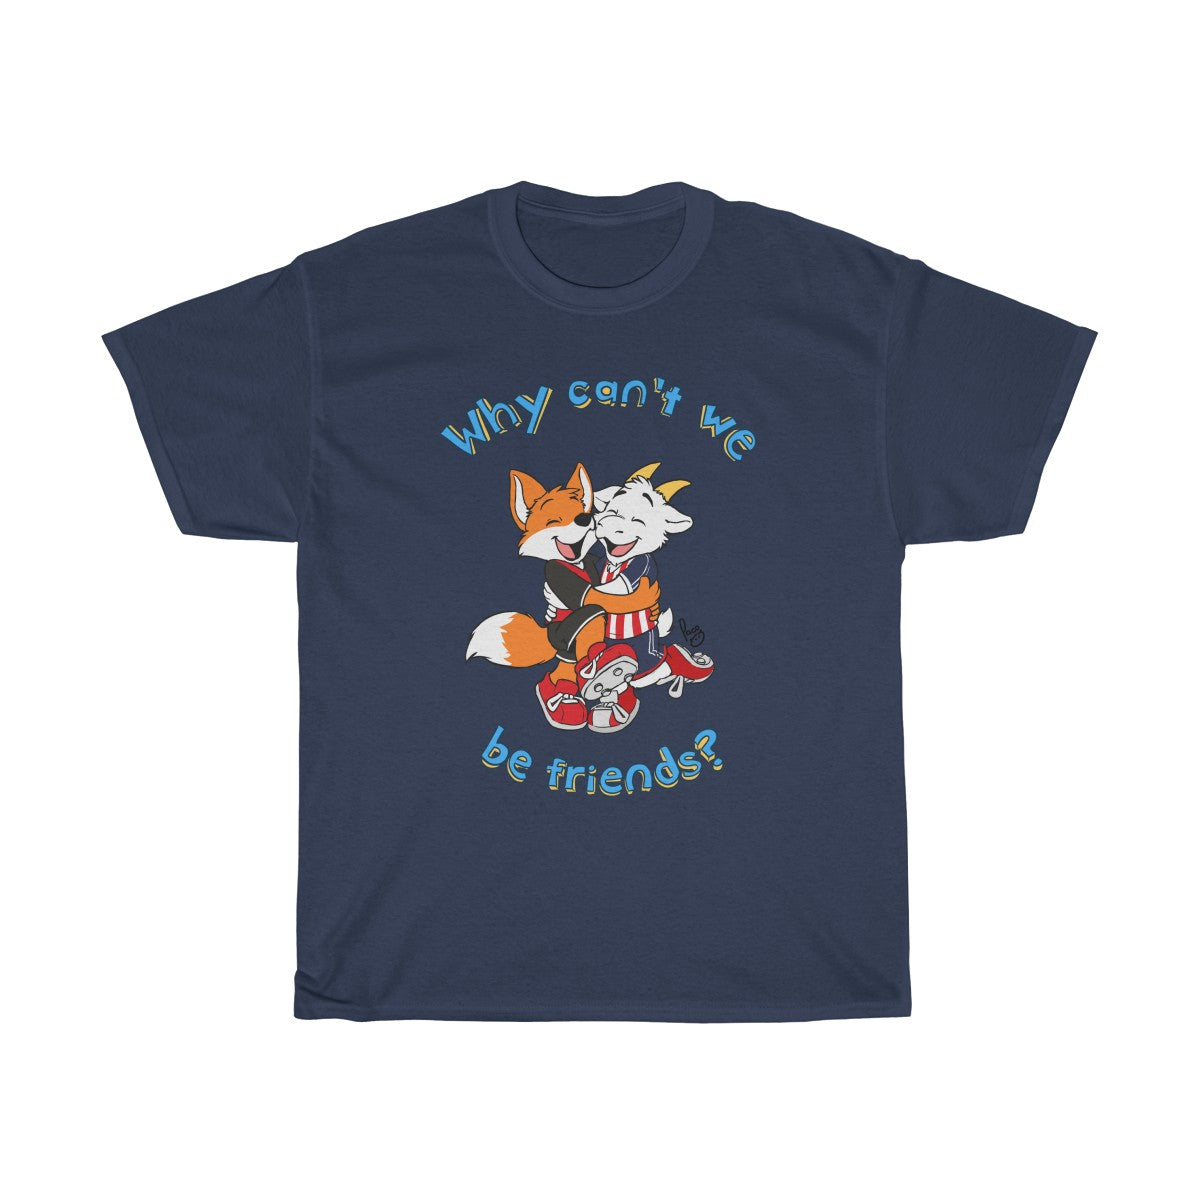 Why Can't we be Friends 2? - T-Shirt T-Shirt Paco Panda Navy Blue S 